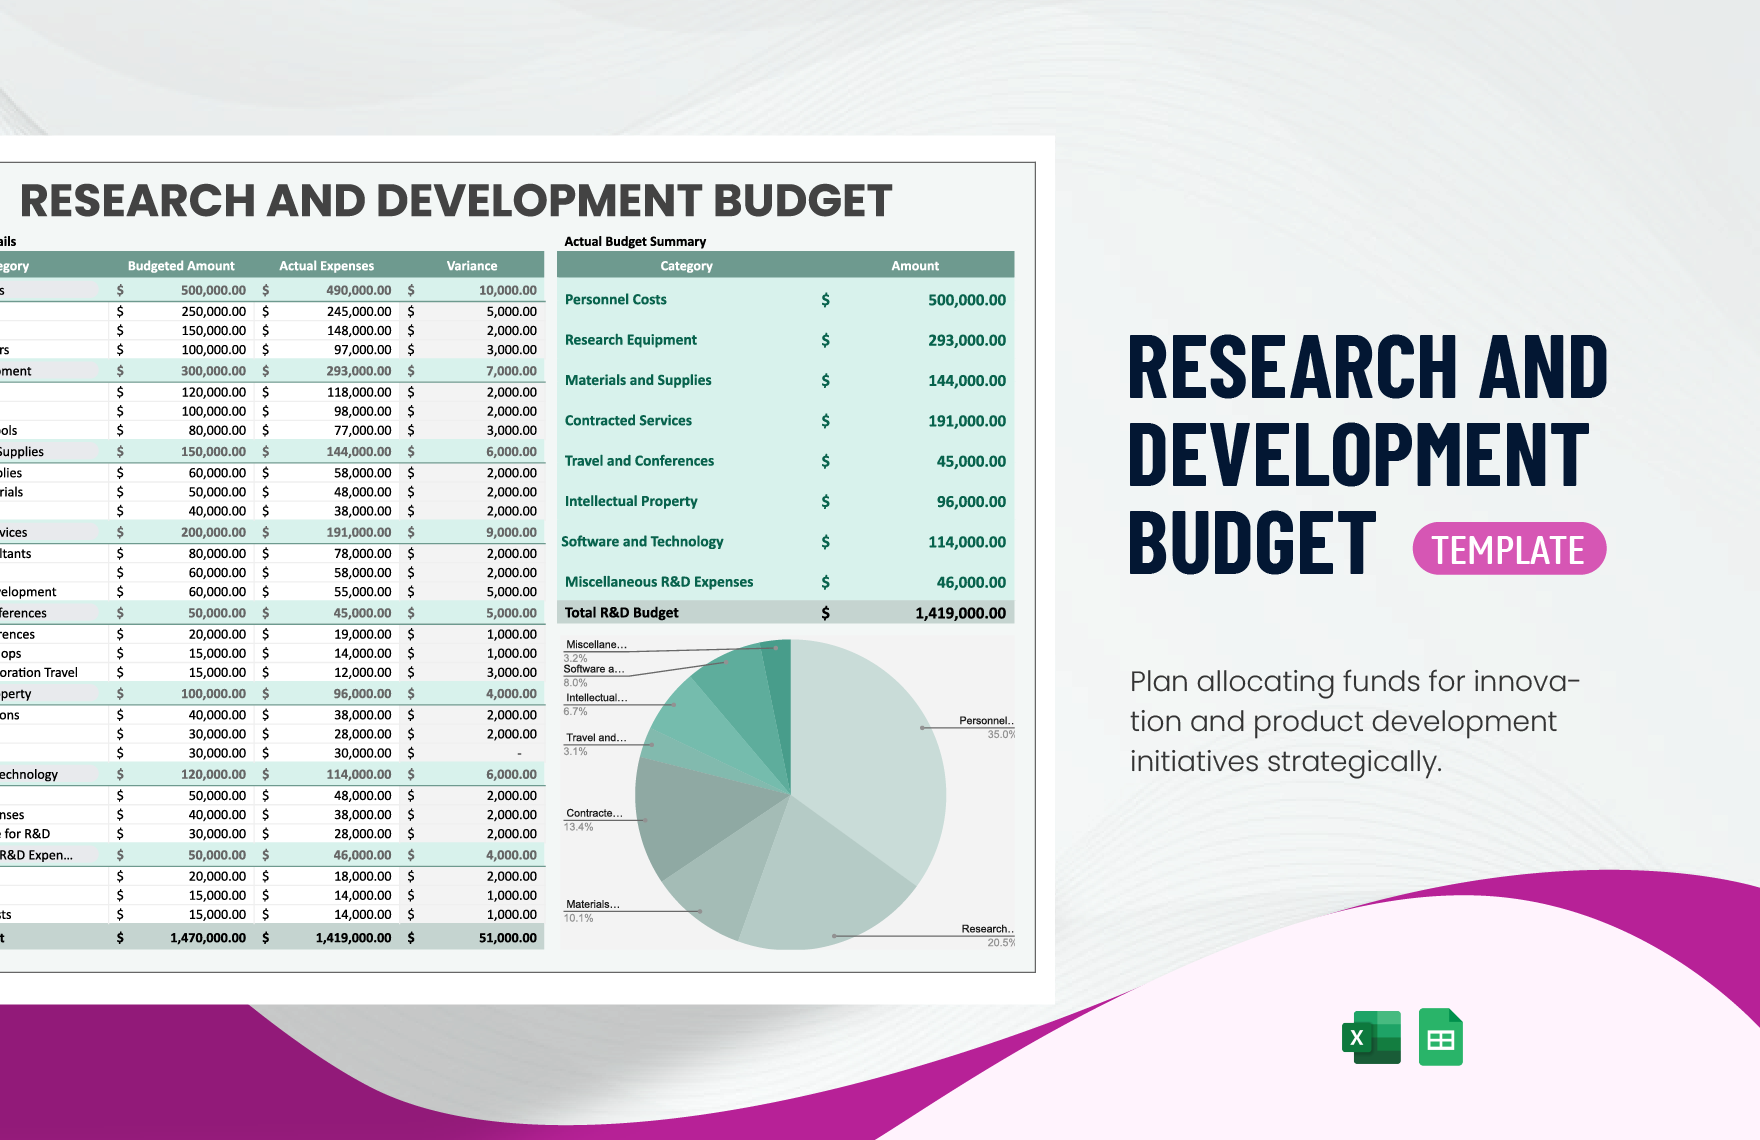 Research and Development Budget Template